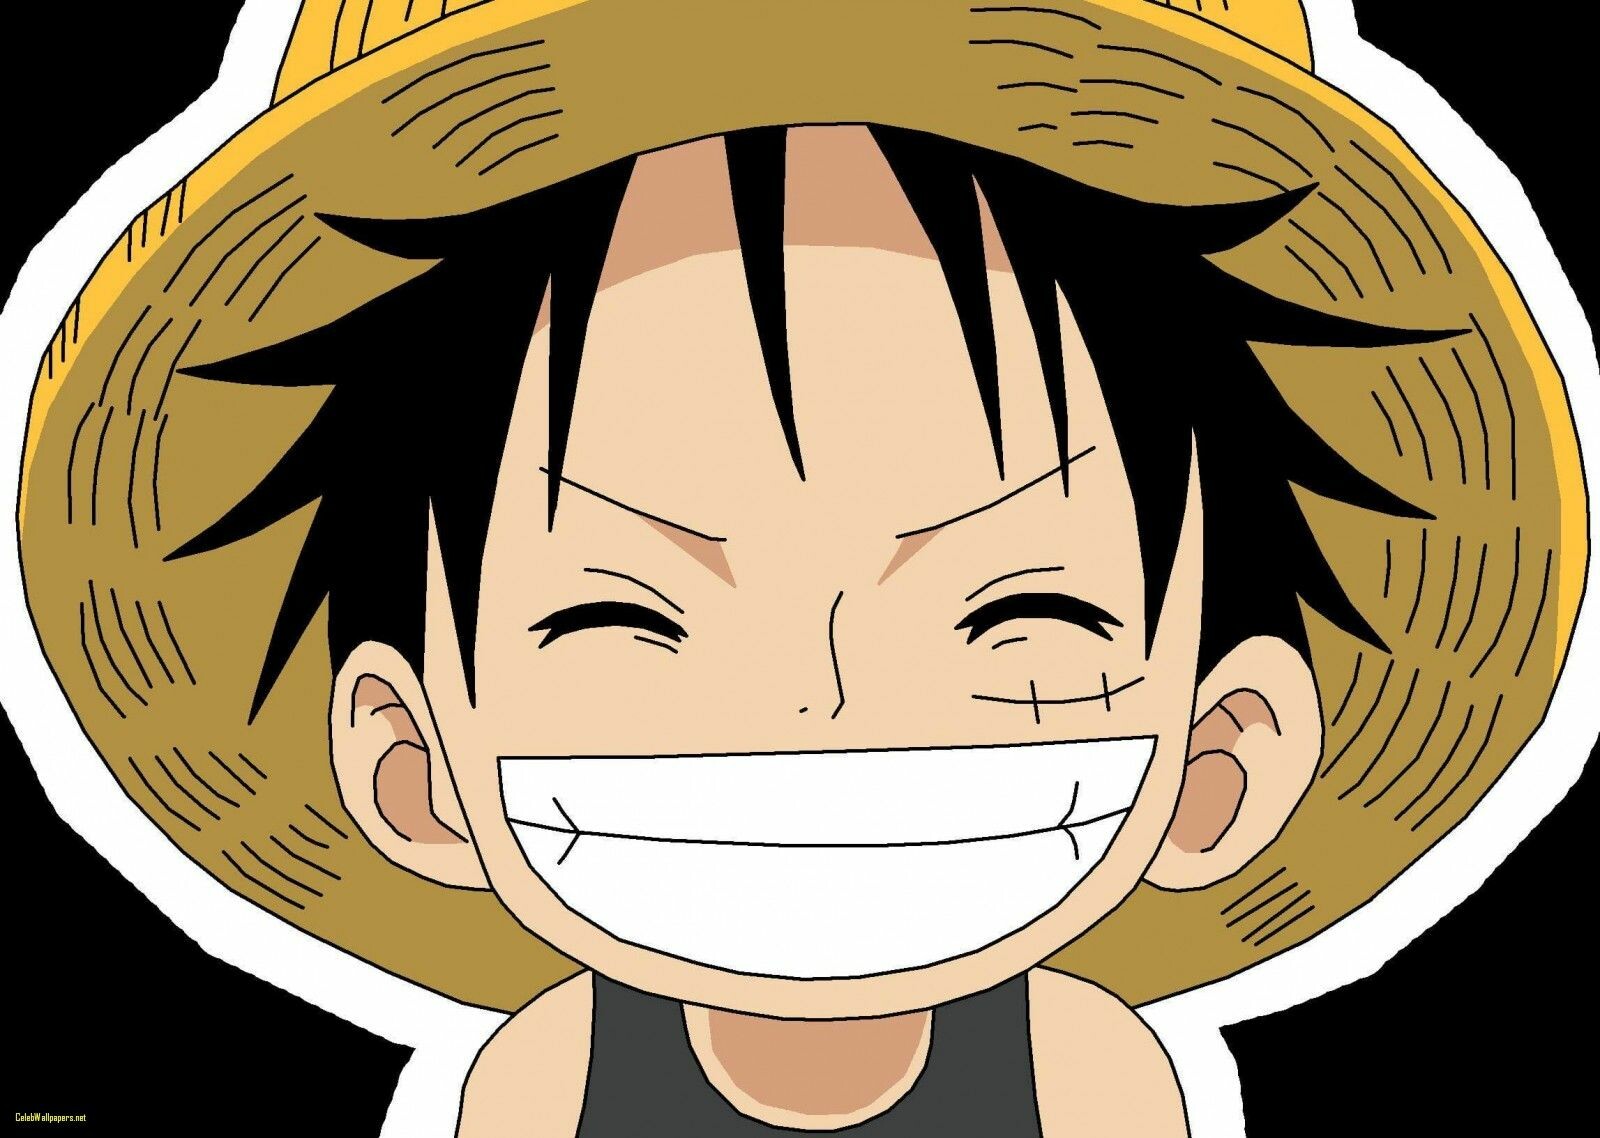 Luffy Wallpaper: HD, 4K, 5K for PC and Mobile. Download free image for iPhone, Android